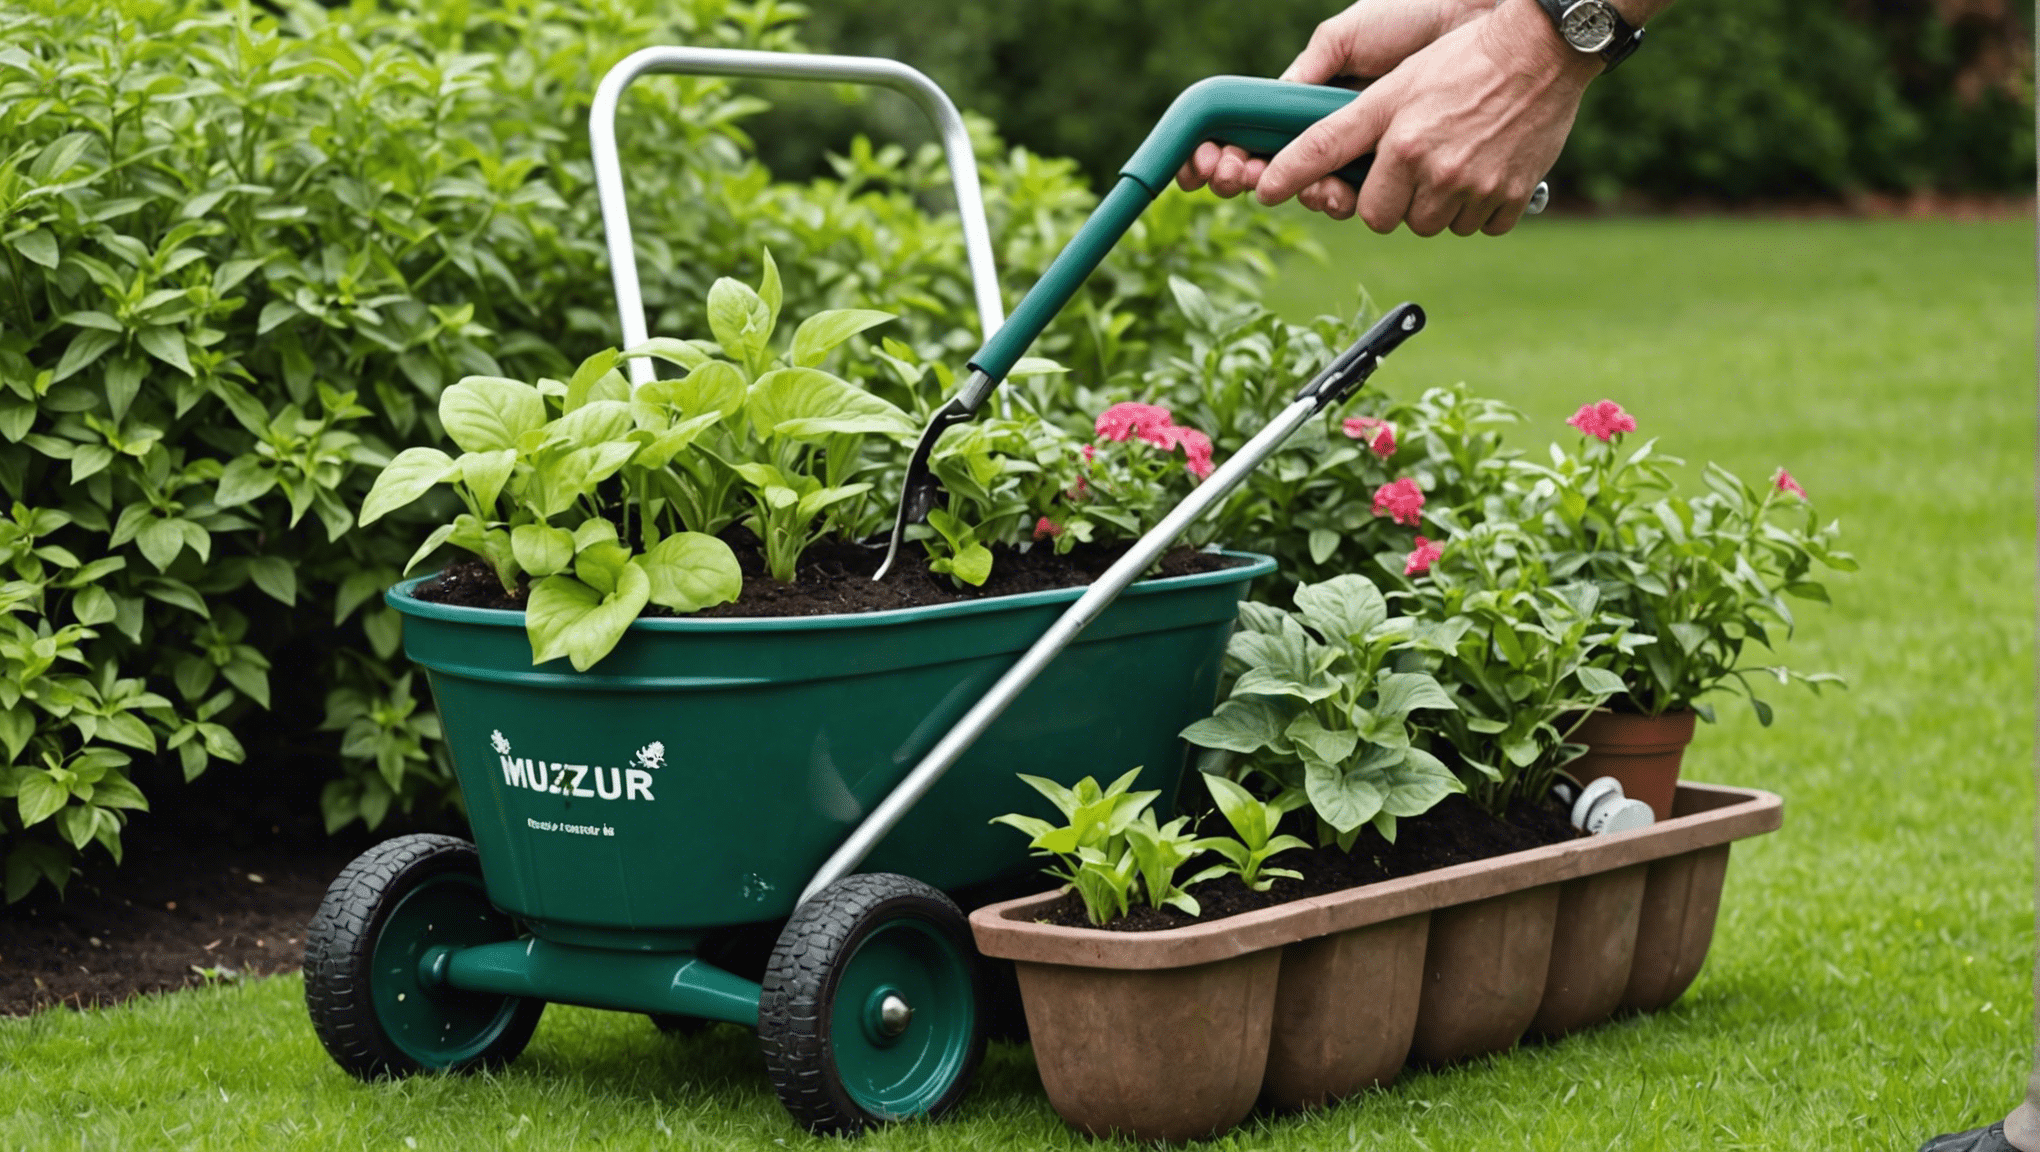 discover a fantastic selection of gardening gifts for men at affordable prices. find the perfect present for the green-fingered guys in your life.